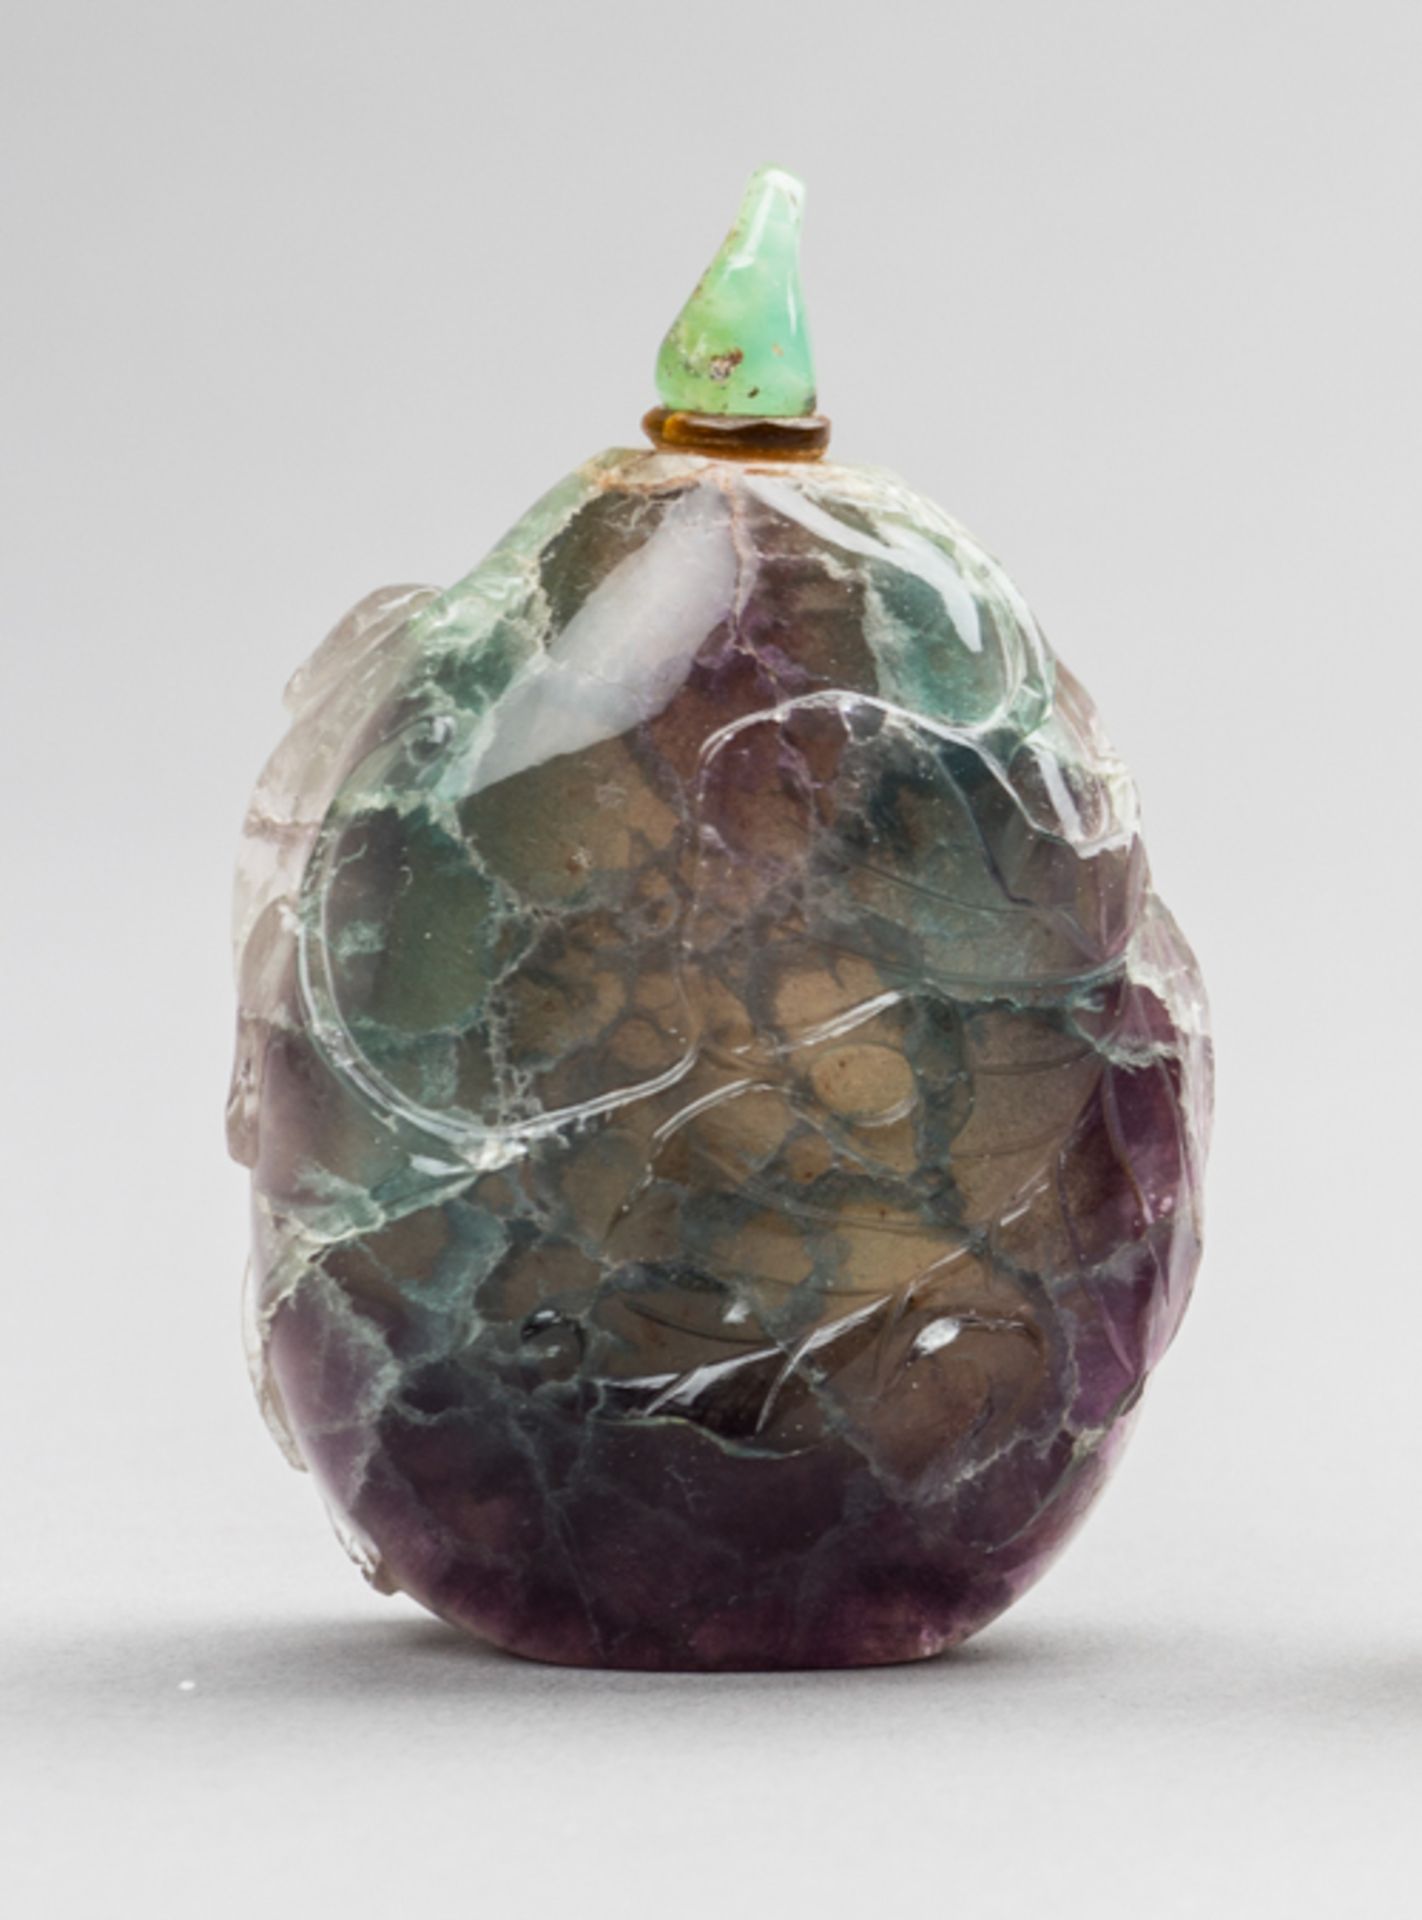 SNUFFBOTTLE: LARGE BLOSSOM AND MONKEY  Tourmaline. China, Qing Dynasty 19th cent.  Multifaceted